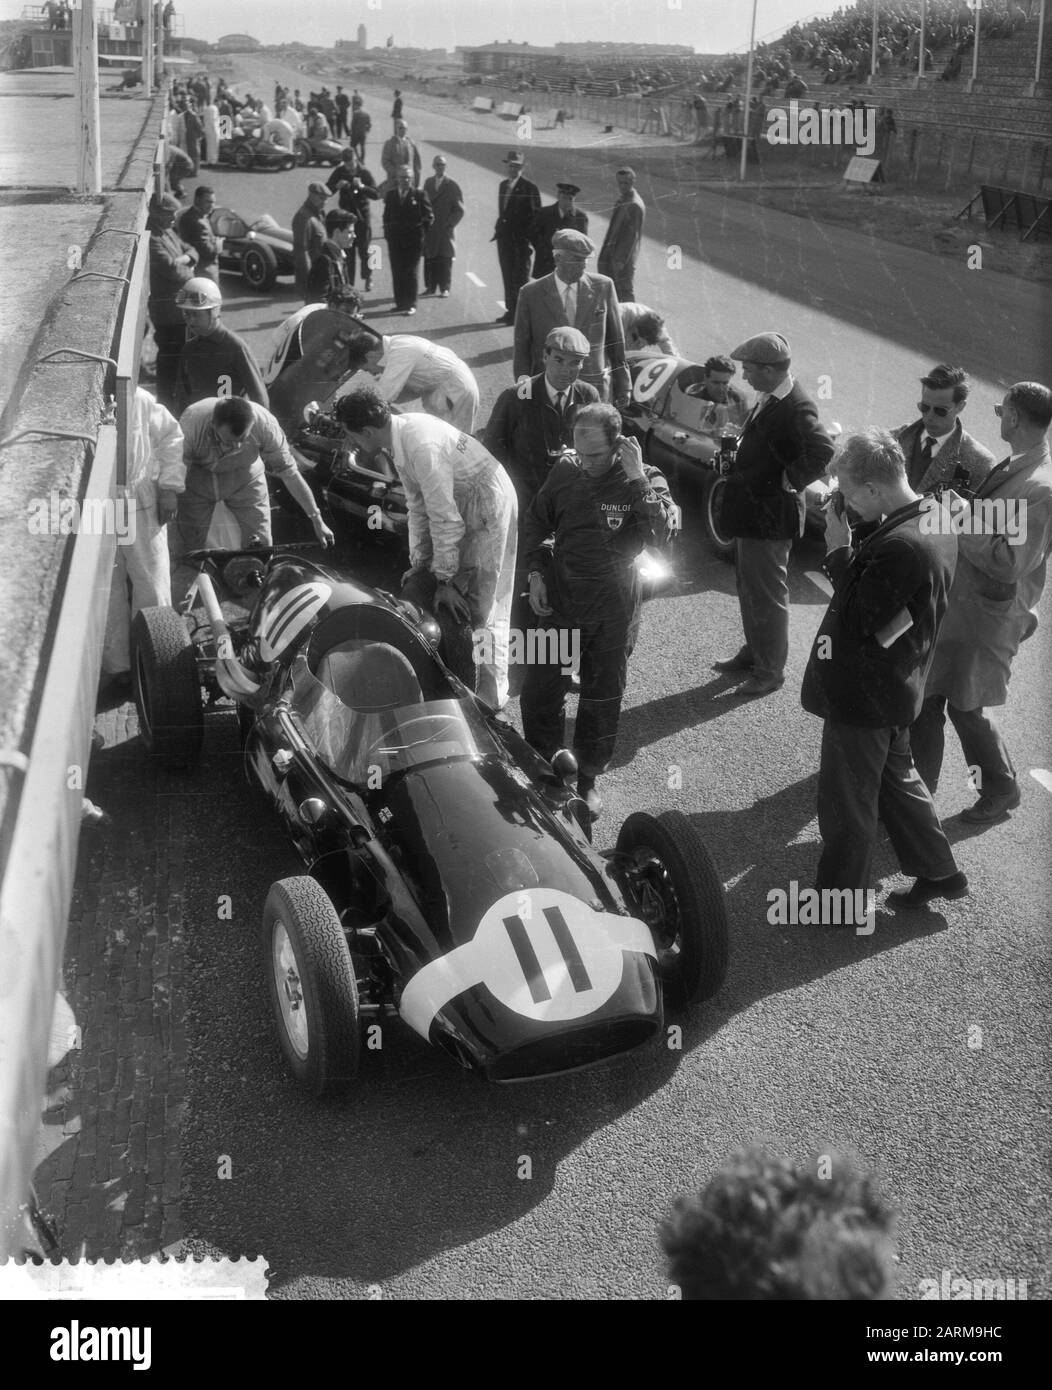 Grand Prix Zandvoort 1959  Training at the Circuit Van Zandvoort of the Grand Prix, Stirling Moss start for a training round Date: 29 May 1959 Location: Noord-Holland, Zandvoort Keywords: motorsport Personal name: Moss, Stirling Stock Photo